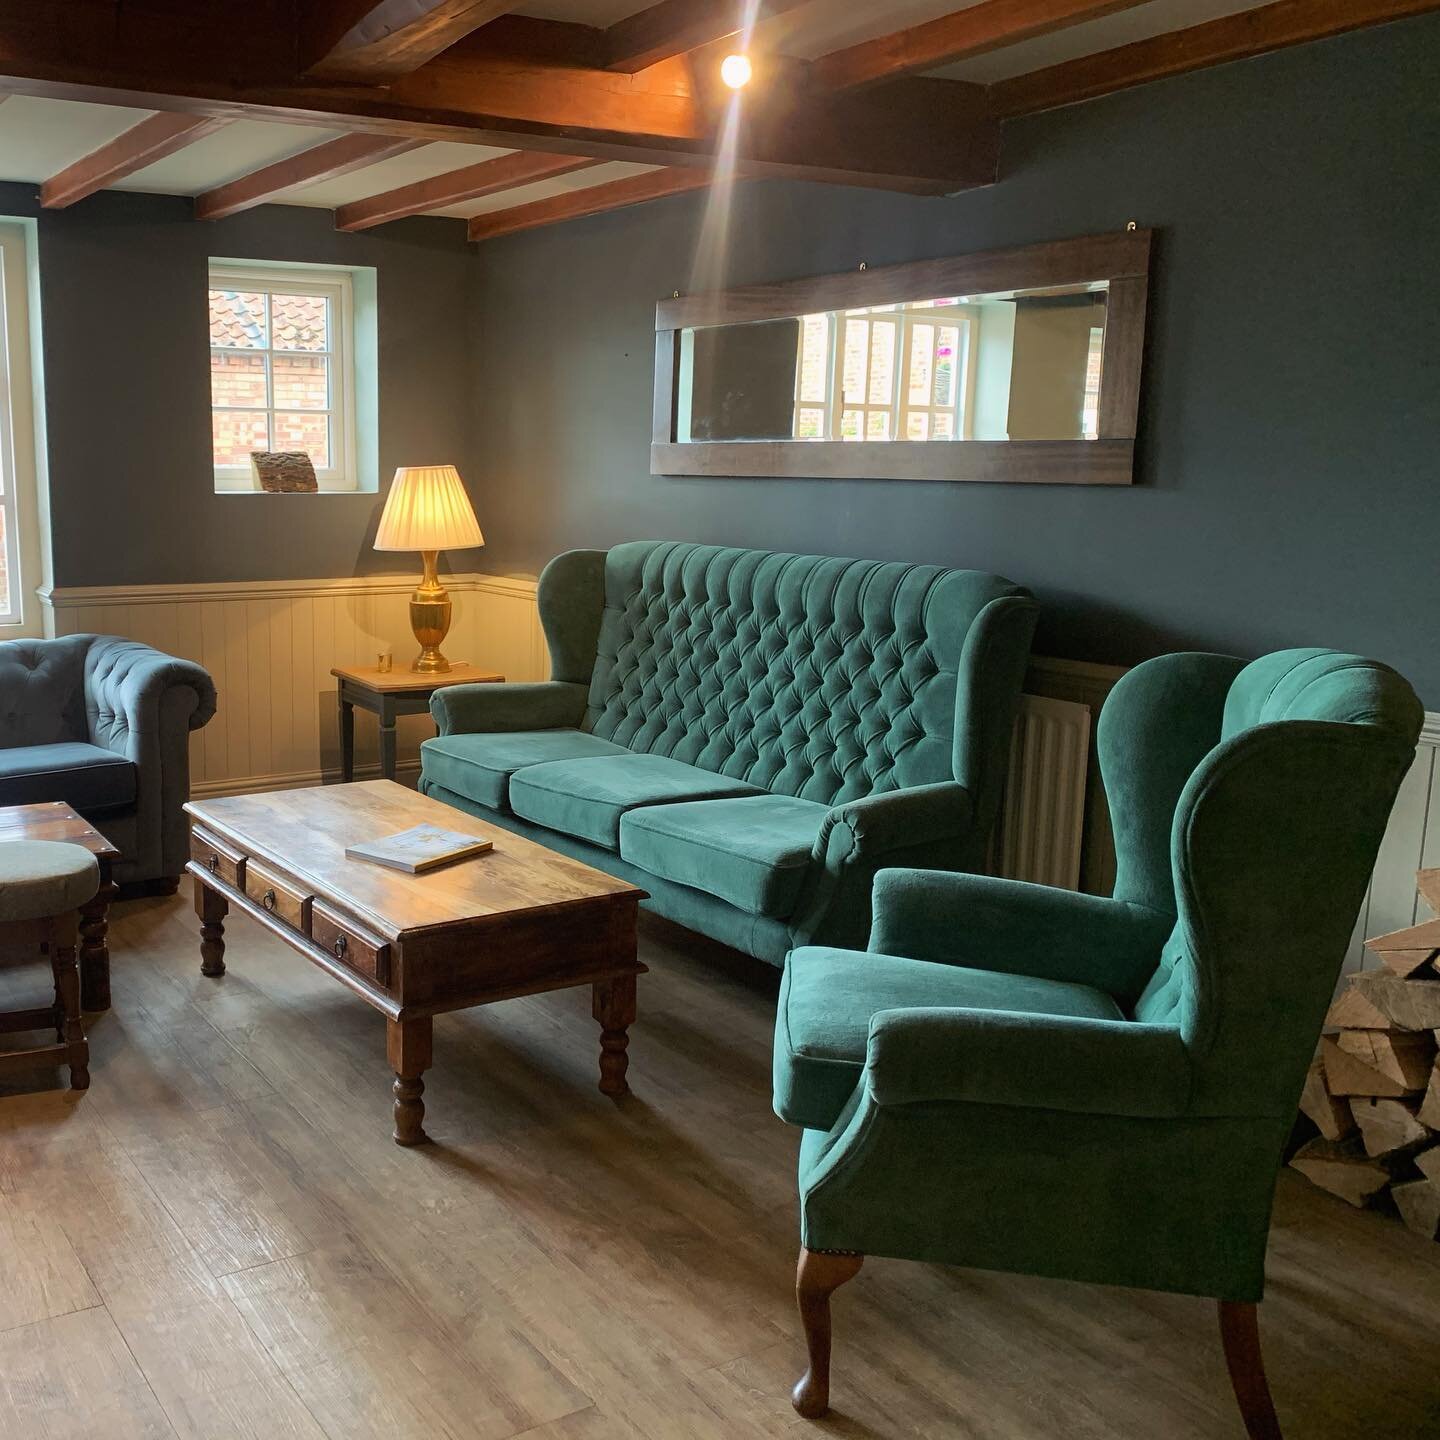 It&rsquo;s great to be back indoors! 🤩

Here&rsquo;s a sneak peak of our new coffee/ sports lounge which we have all been very much looking forward to opening... 

Open from Tuesday - Sunday ☕️ 

#thebootandshoeinn #thecoachhouse #countrypub #publif